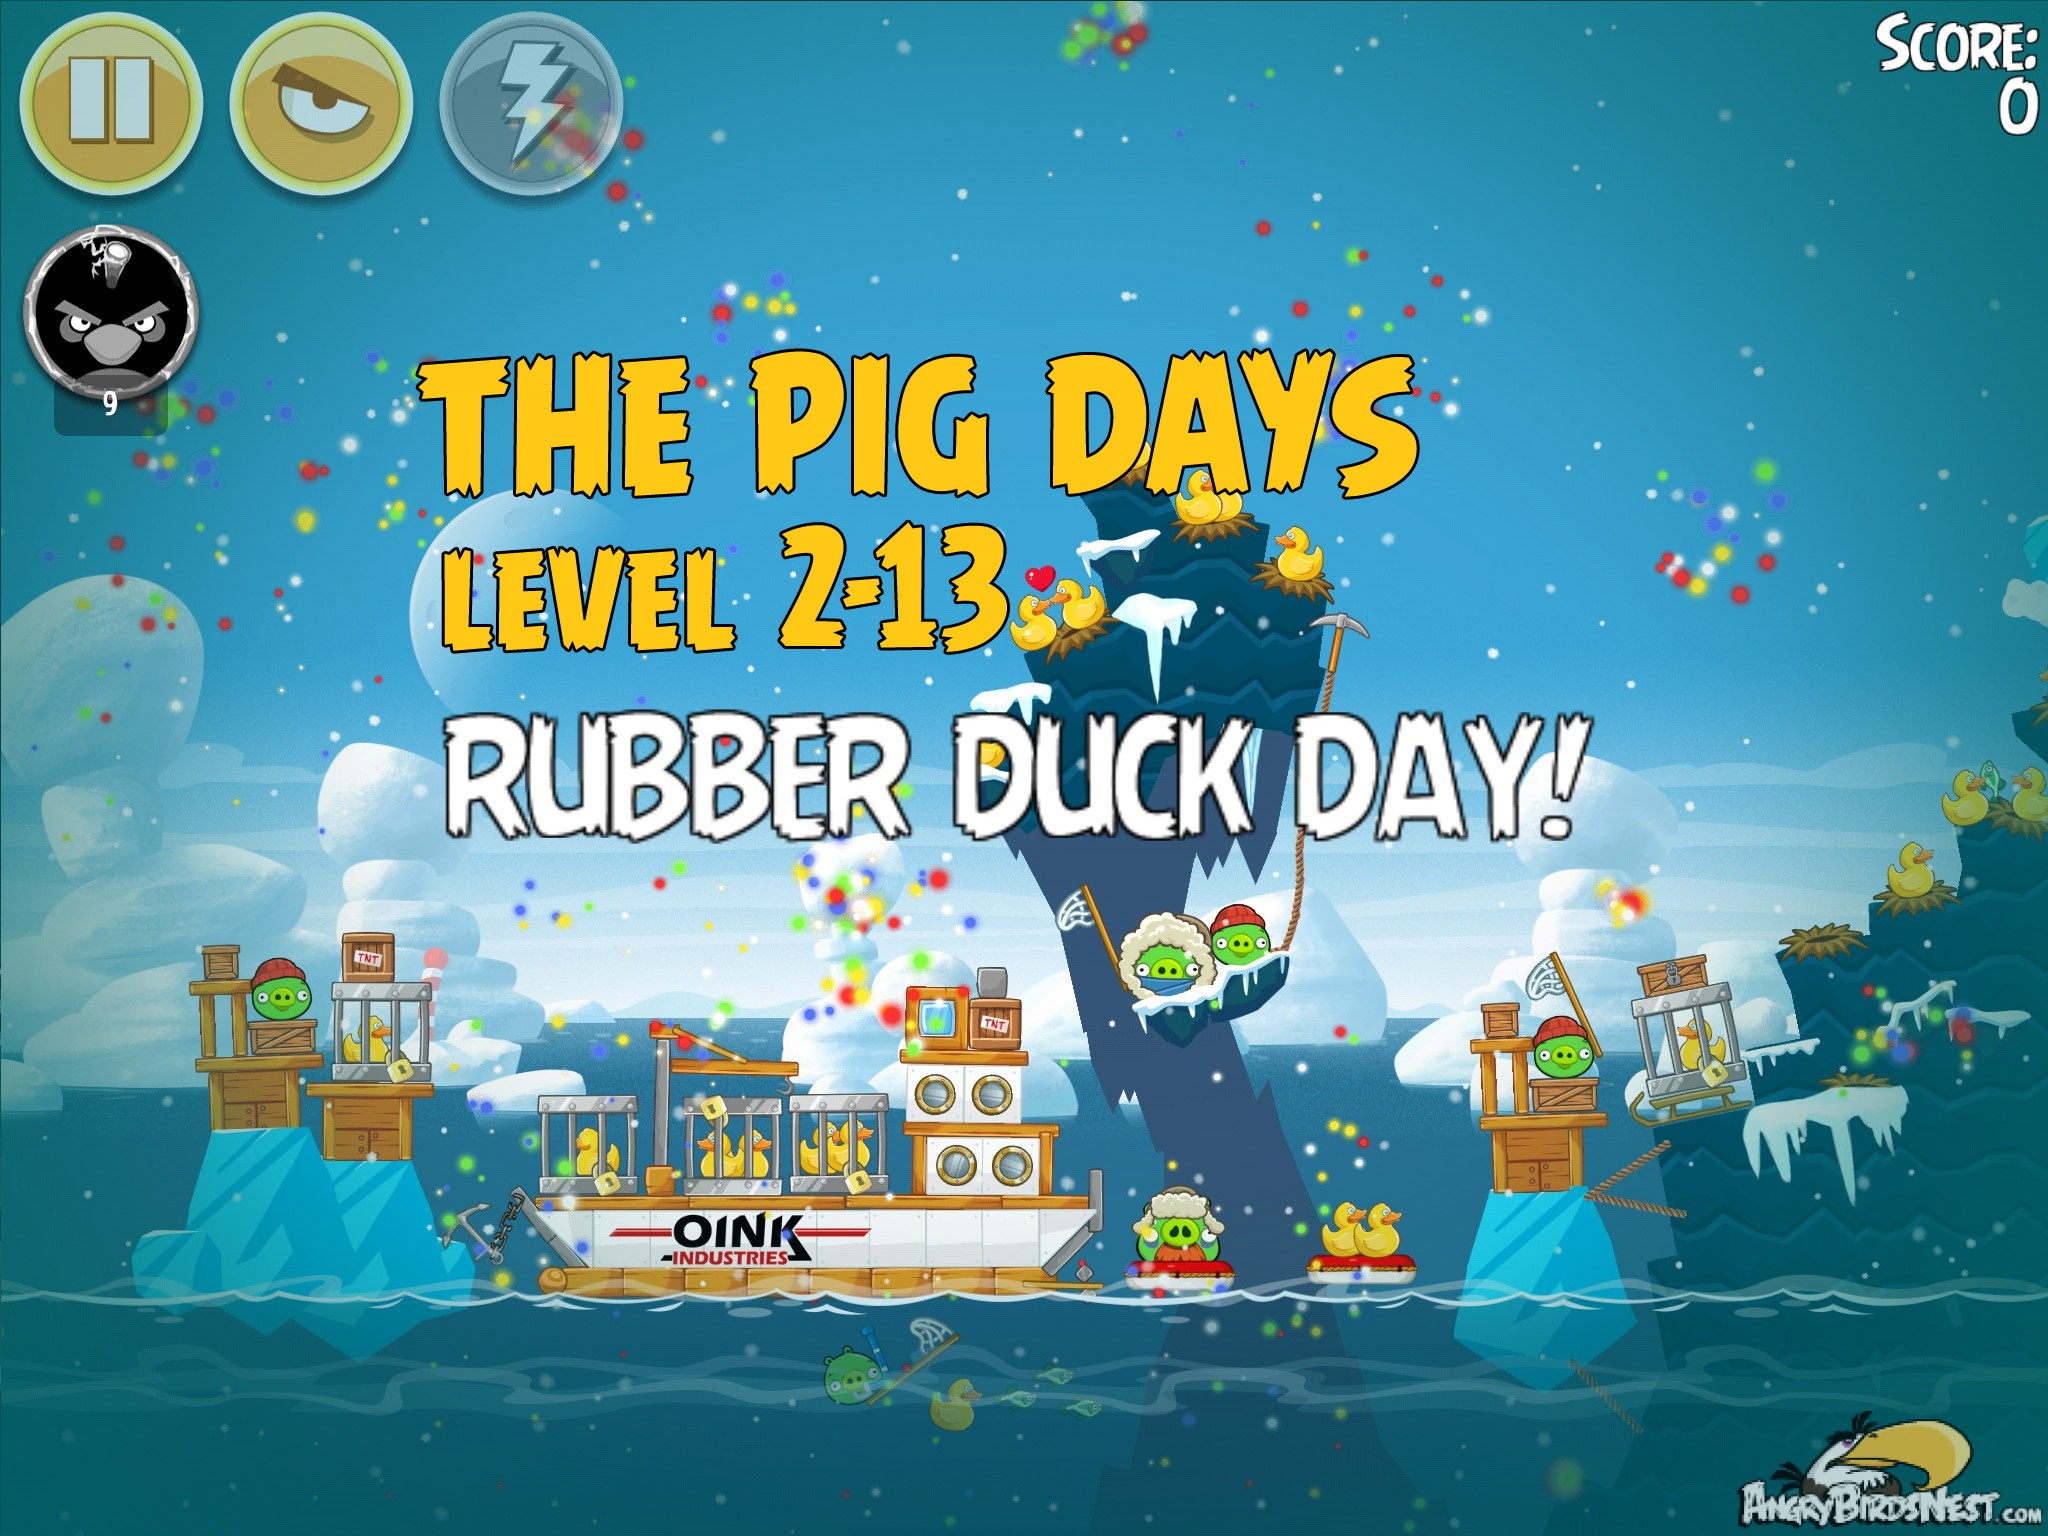 Angry Birds Seasons The Pigdays Level 2-13 Labeled